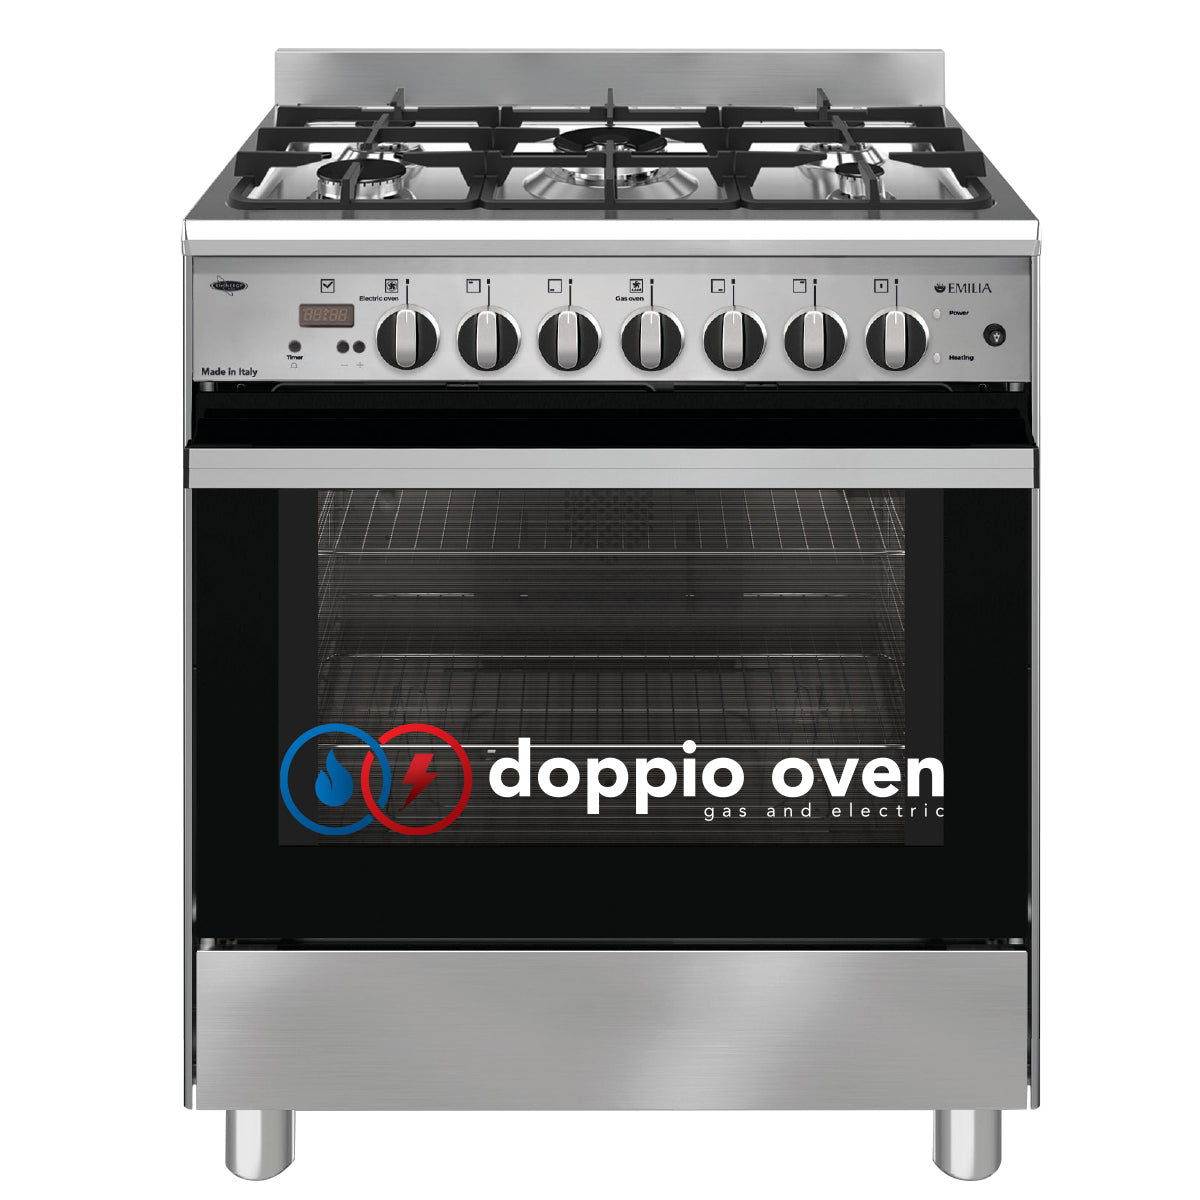 Emilia 70cm stainless steel cooker with Doppio Oven